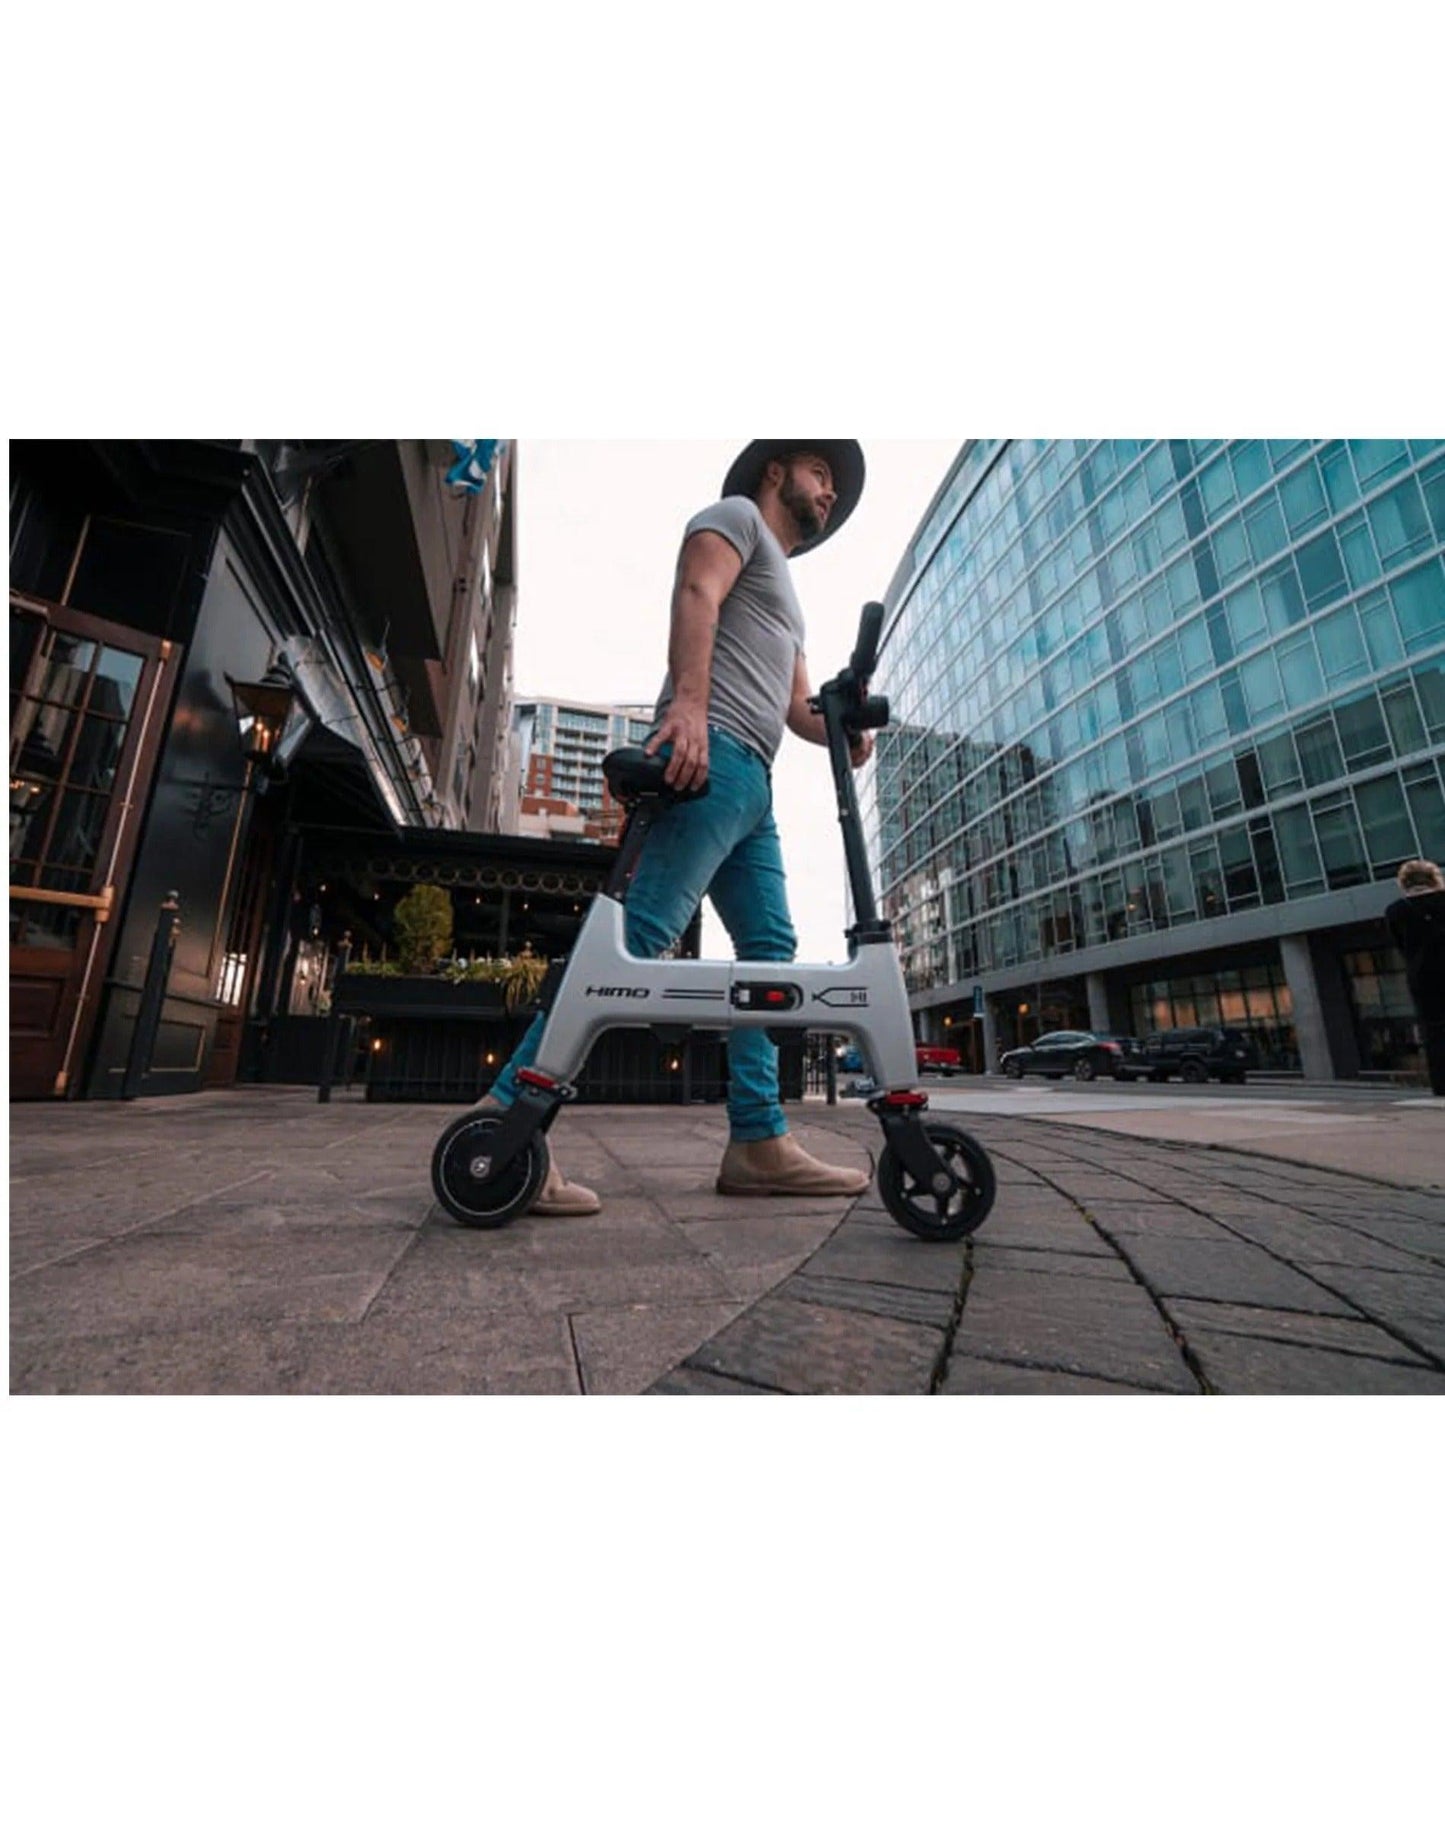 Himo H1 Portable Folding Scooter - Electric Scooter - Scooters - Electric Monkey NZ